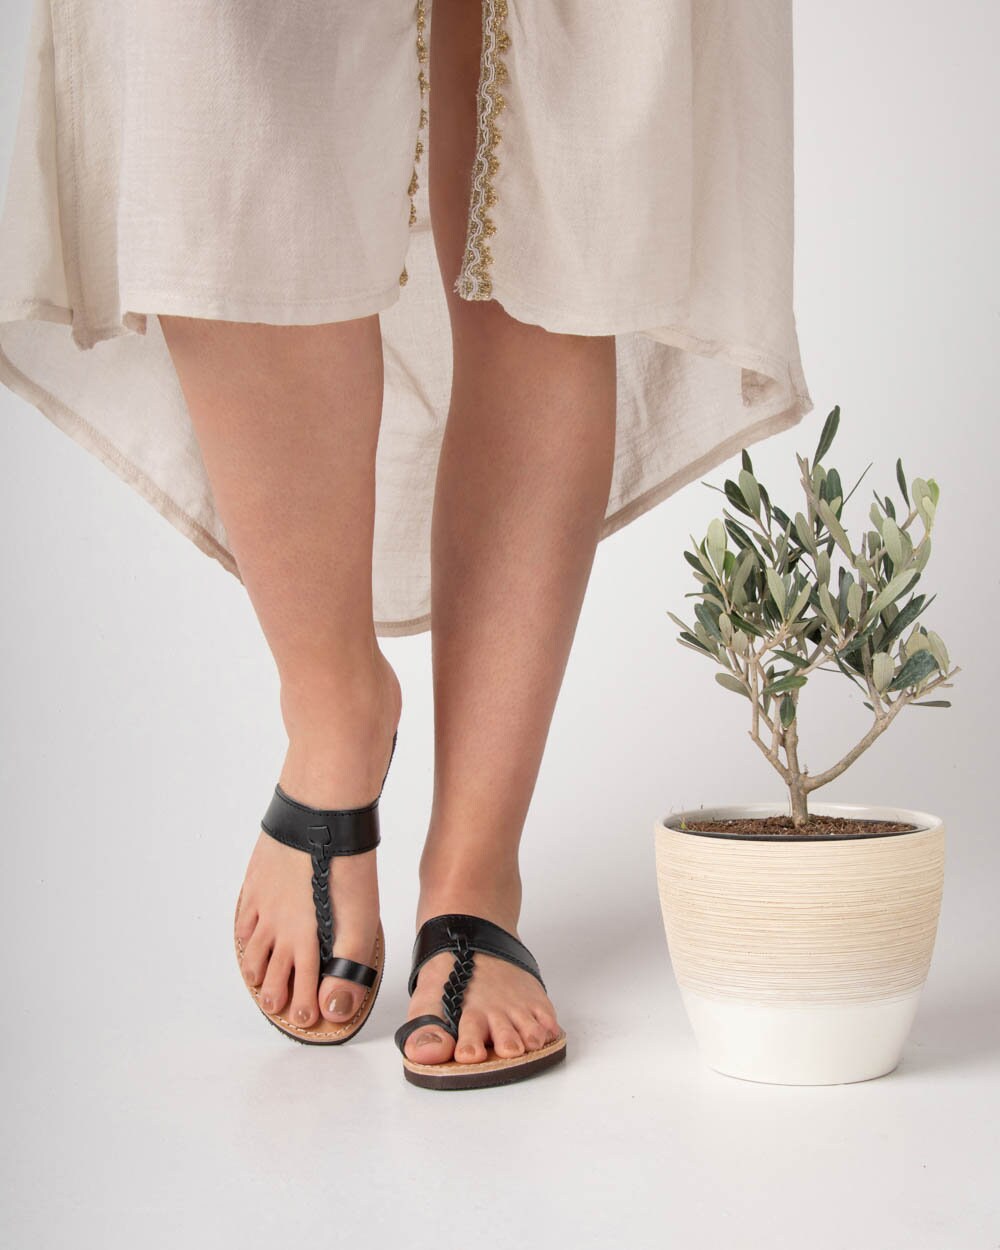 Brown leather braided thong sandals, Minimalist toe ring leather sandals, Greek leather sandals flats, Calf leather